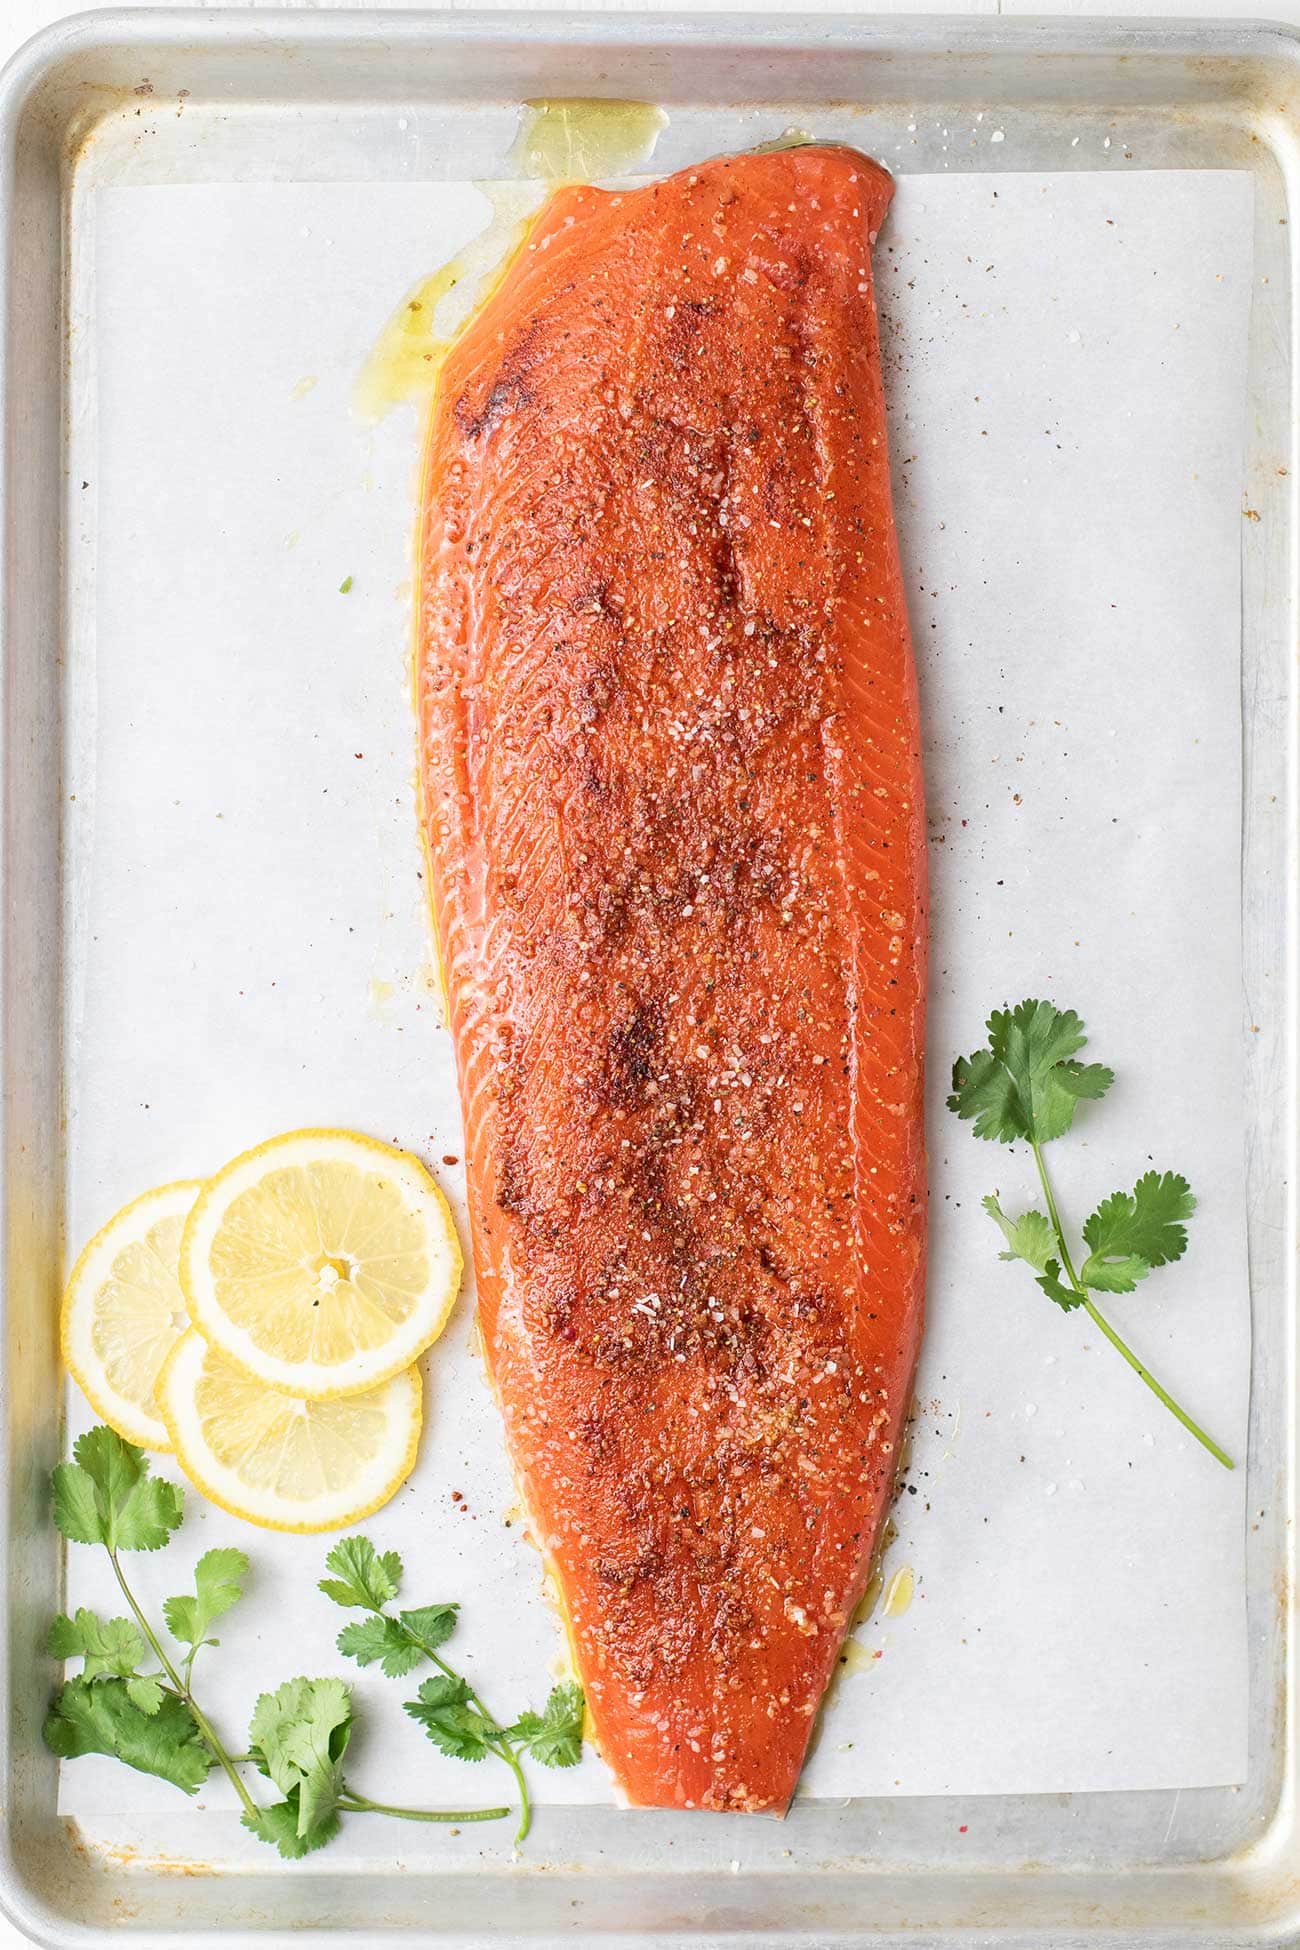 A salmon filet on a baking pan with olive oil and spices rubbed in to it.